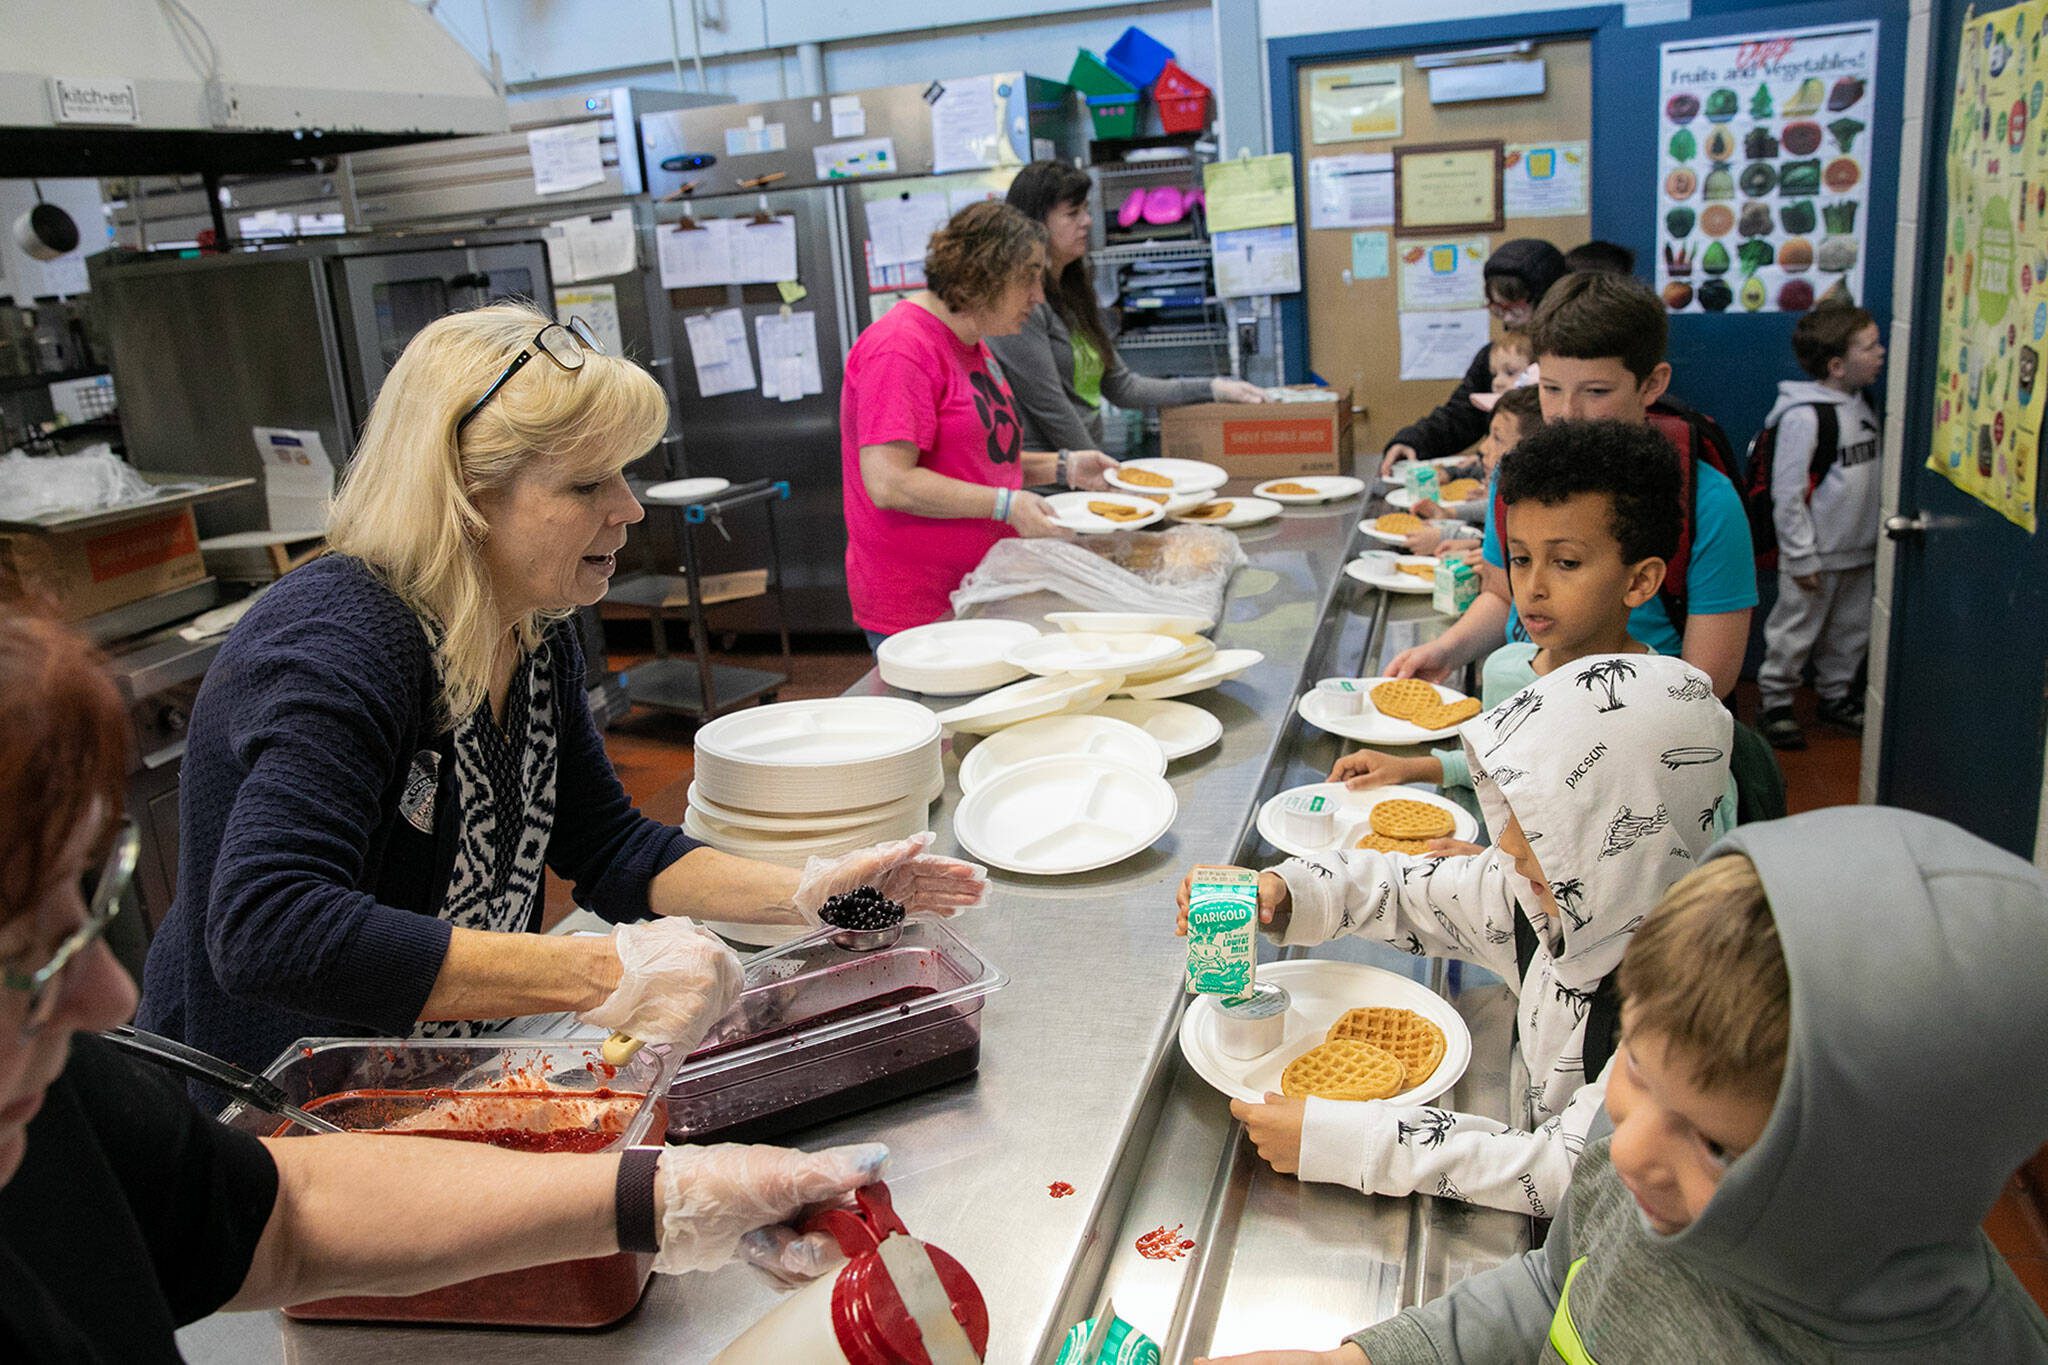 Students arriving off the bus get in line to score some waffles during a free pancake and waffle breakfast at Lowell Elementary School on Friday, May 26, 2023, in Everett, Washington. (Ryan Berry / The Herald)